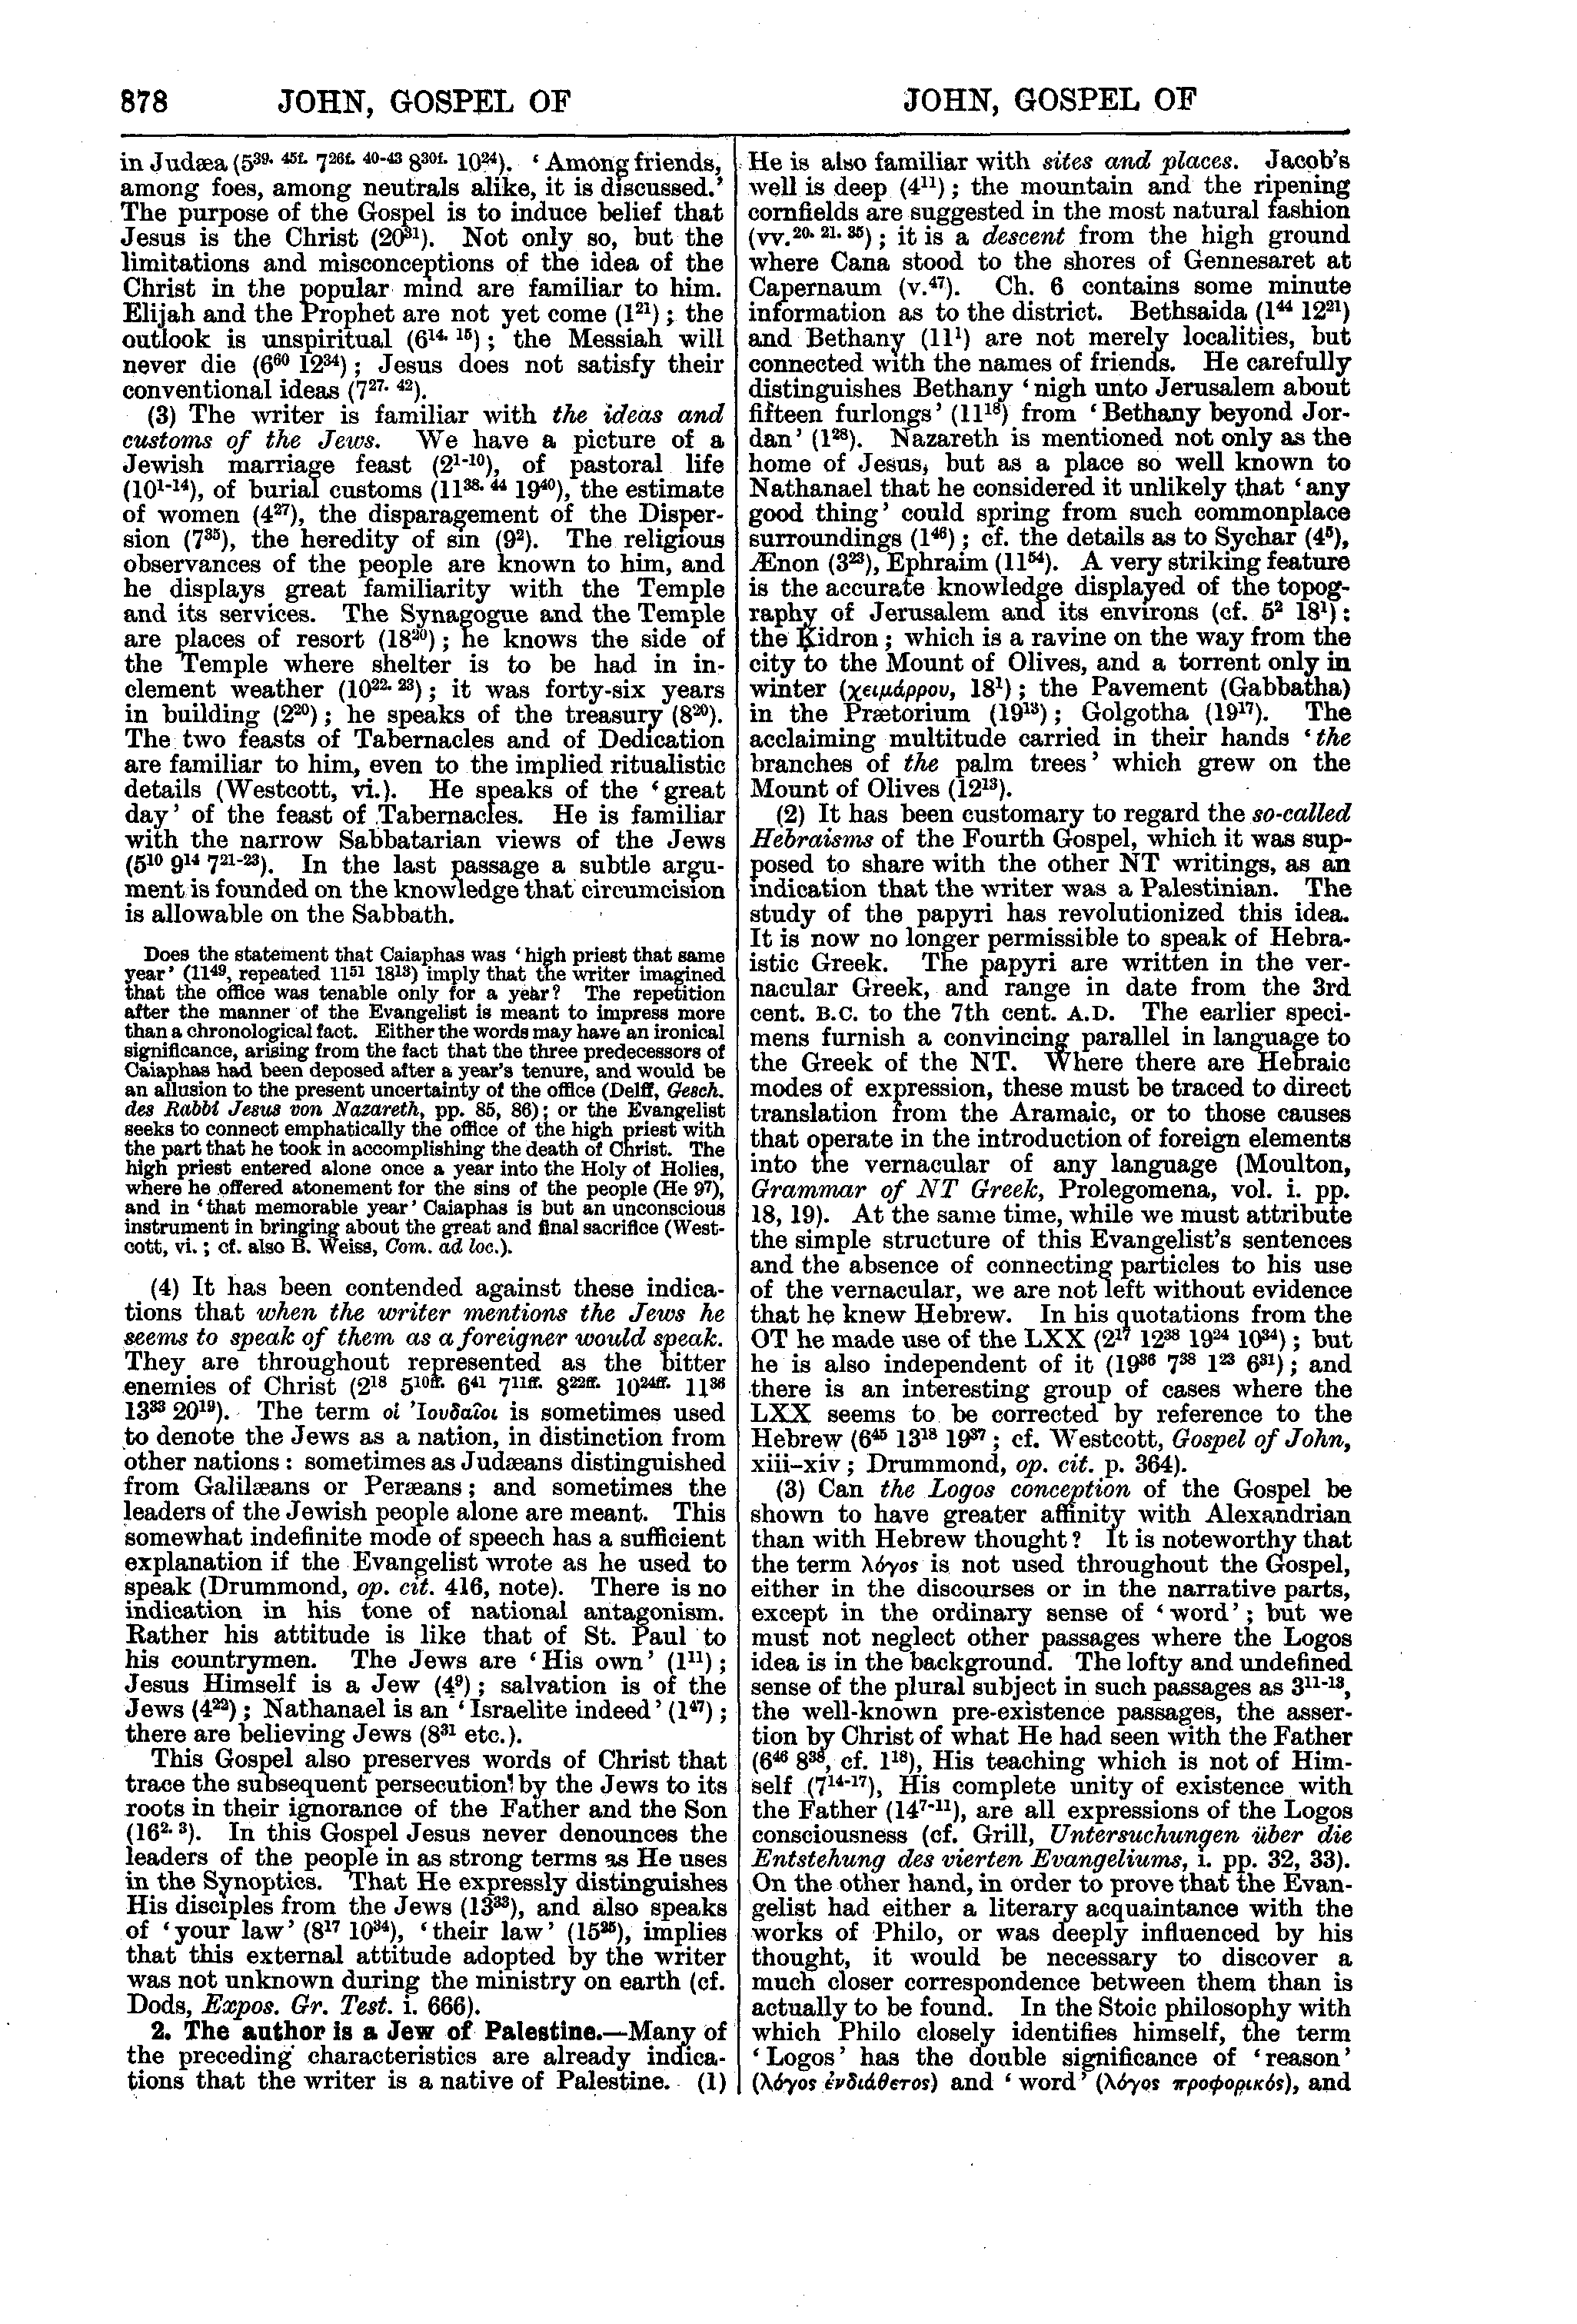 Image of page 878